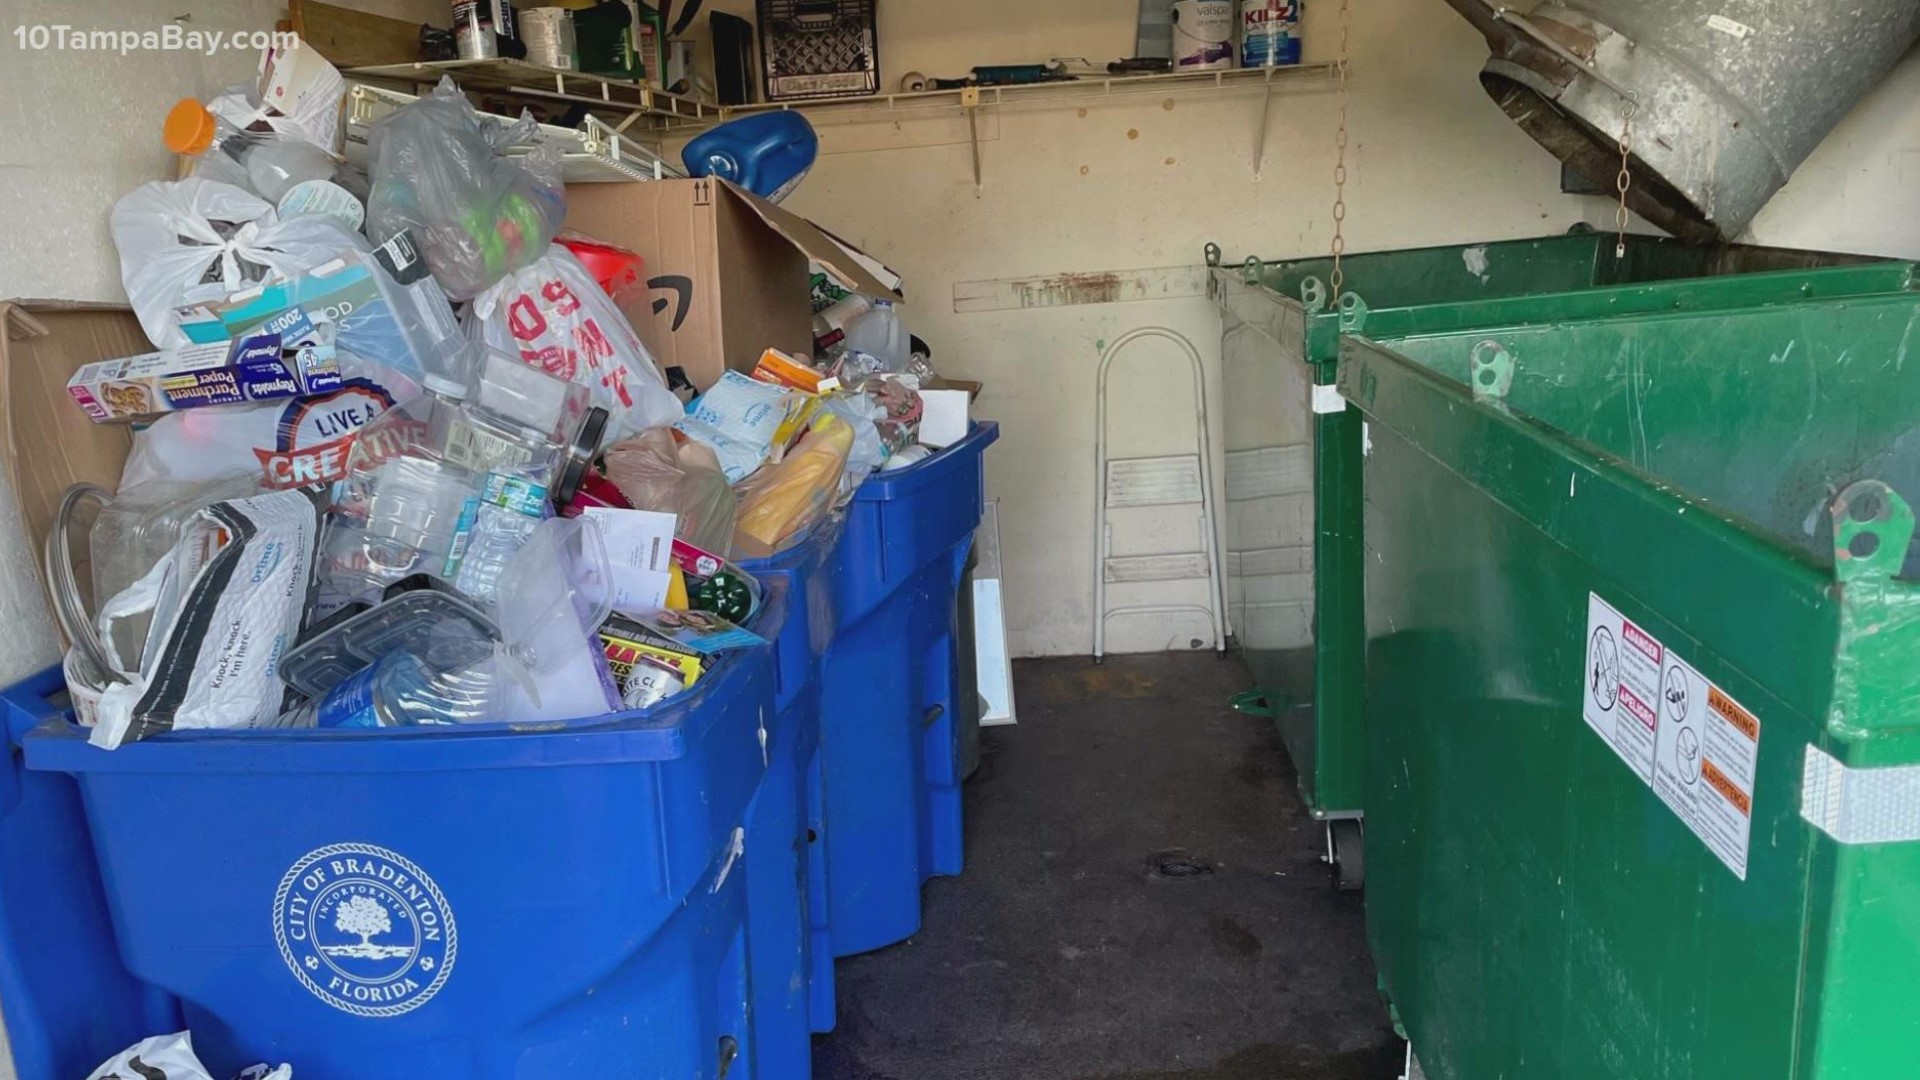 The city says they will be opening up drop off centers due to a lack of drivers and a rise in contaminated recycling items.